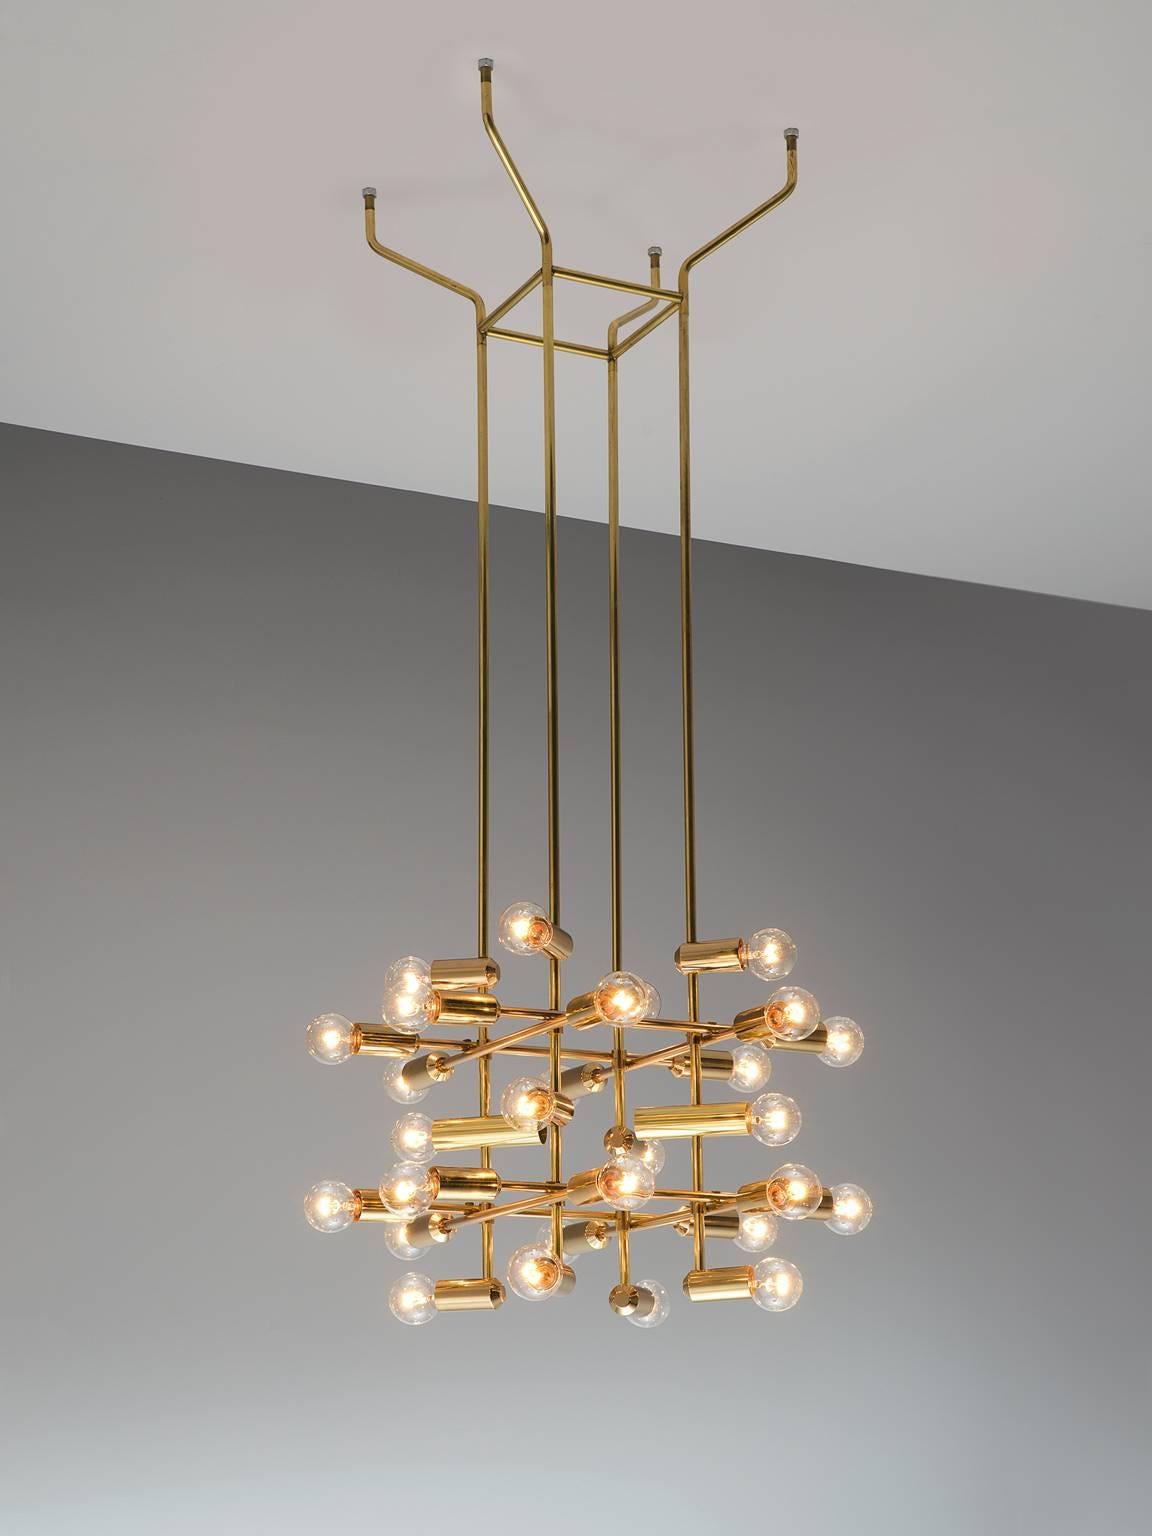 Chandelier in brass, Switzerland, 1960s.

This delicate chandelier is Minimalist yet warm. Each light consists of 28-light bulbs that are placed on the ends of brass horizontal beam. The beams form a cross-like pattern that is attached to the